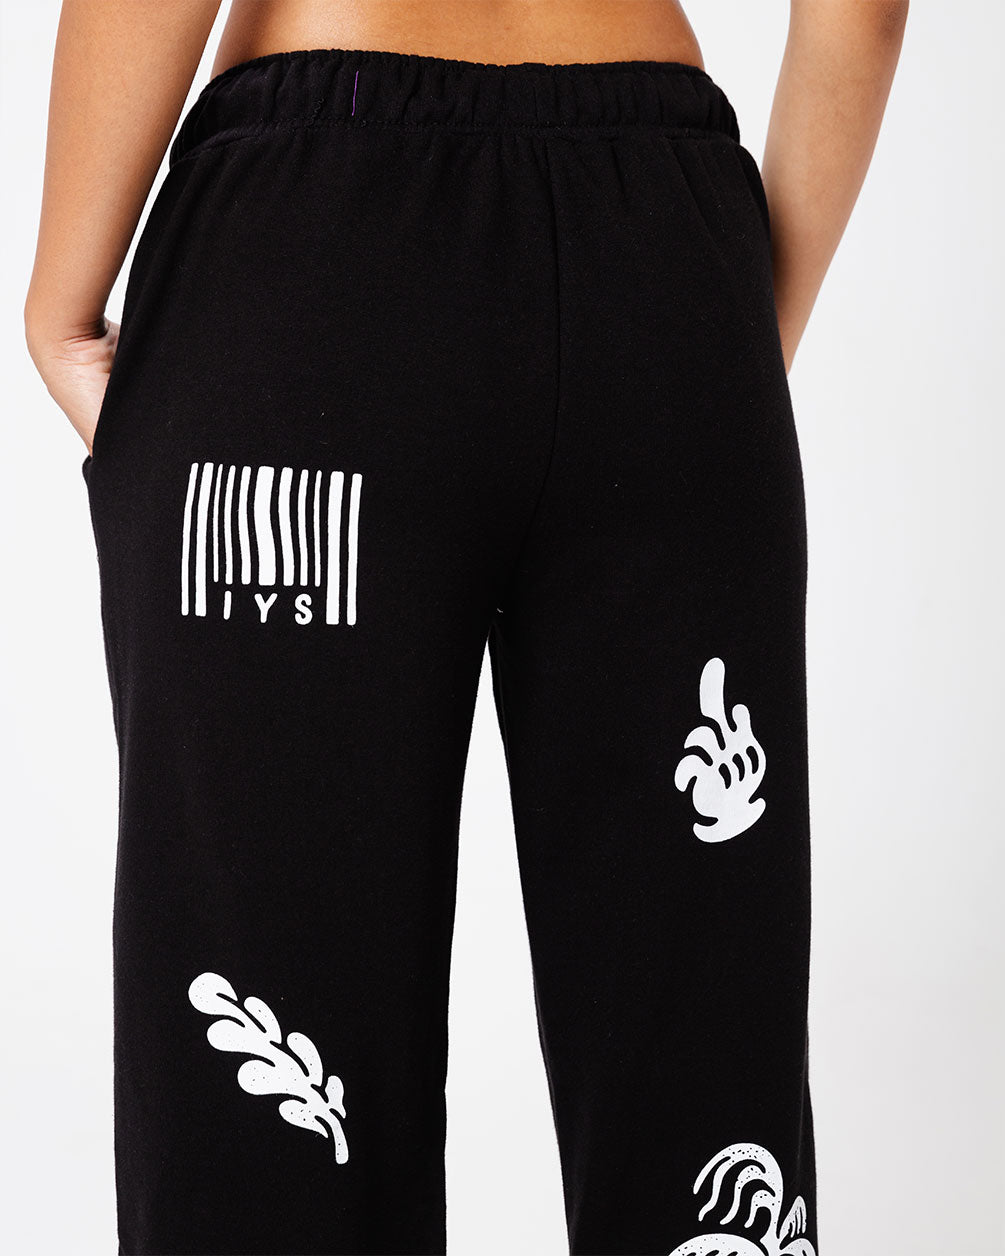 Black Printed Swants (Sweatpants) Swants IN YOUR SHOE 